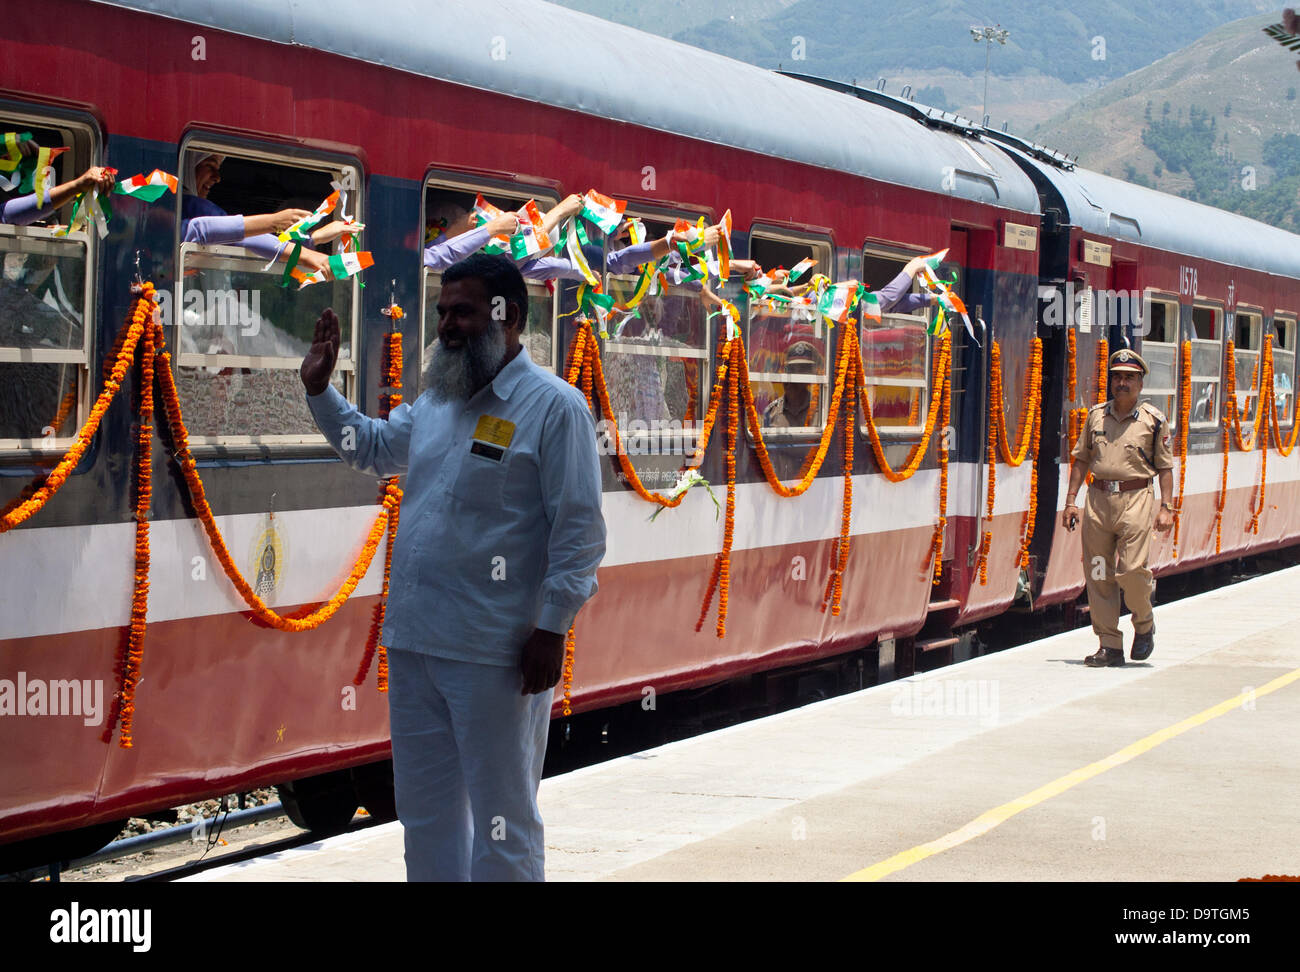 Srinagar, Indian Administered Kashmir 26th June 2013. Security officials wave at school children aboard the first train  connecting the Banihal  and Qazigund regions of Indian-administered Kashmir  on June 26,2013,  in Banihal, 125 kilometres from Srinagar,  the  summer capital city, of the disputed Himalyan region.  The train    reached Qazigund in 25 minutes, passing through  an 11-km long tunnel, AsiaÕs second longest , through the Pir Panchal mountain range  . Credit:  yawar nazir kabli/Alamy Live News Stock Photo